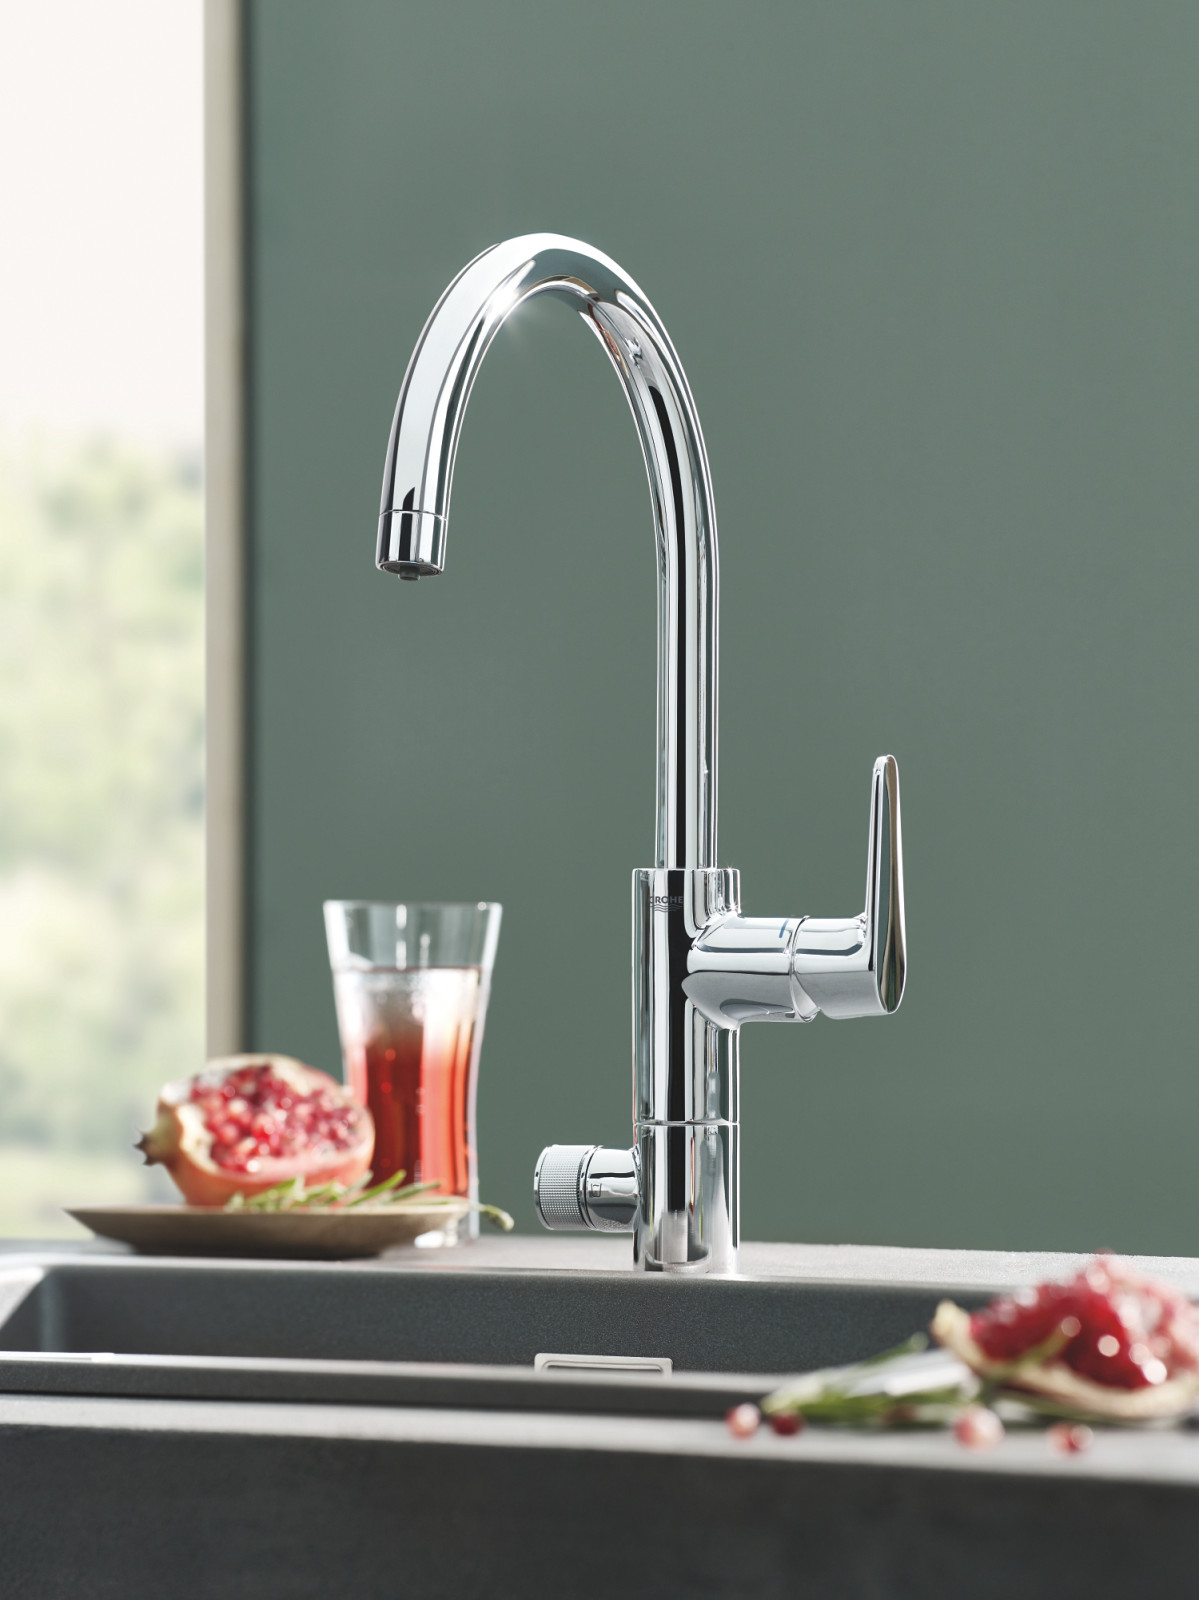 GROHE Blue Accessories